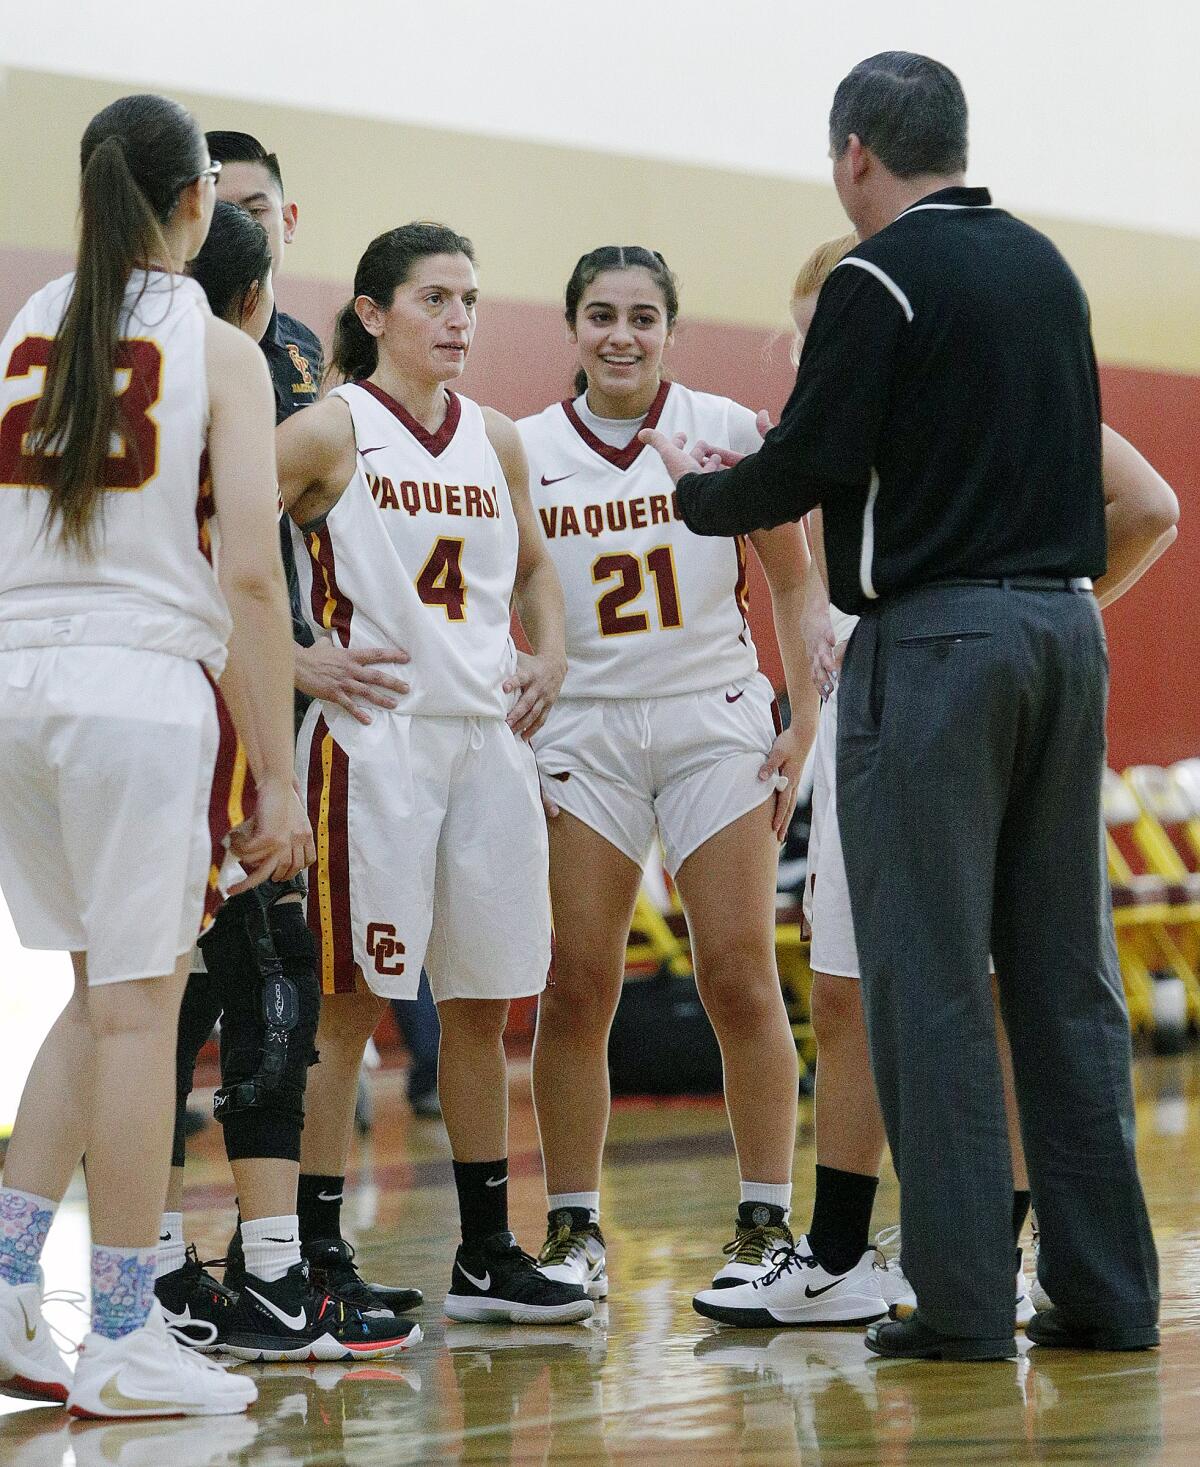 Glendale Community College's Vicky Oganyan, center, takes instructions from Glendale Community College's head coach Joel Weiss during a timeout against Allan Hancock in a women's basketball game in the annual Vaquero basketball tournament at Glendale Community College on Wednesday, December 18, 2019. Oganyan is the long-time head coach of the Burroughs High School girls' basketball team and is playing for GCC while taking classes at GCC. Glendale won the game to improve to 10-1 on the season by defeating Allan Hancock 58-50.